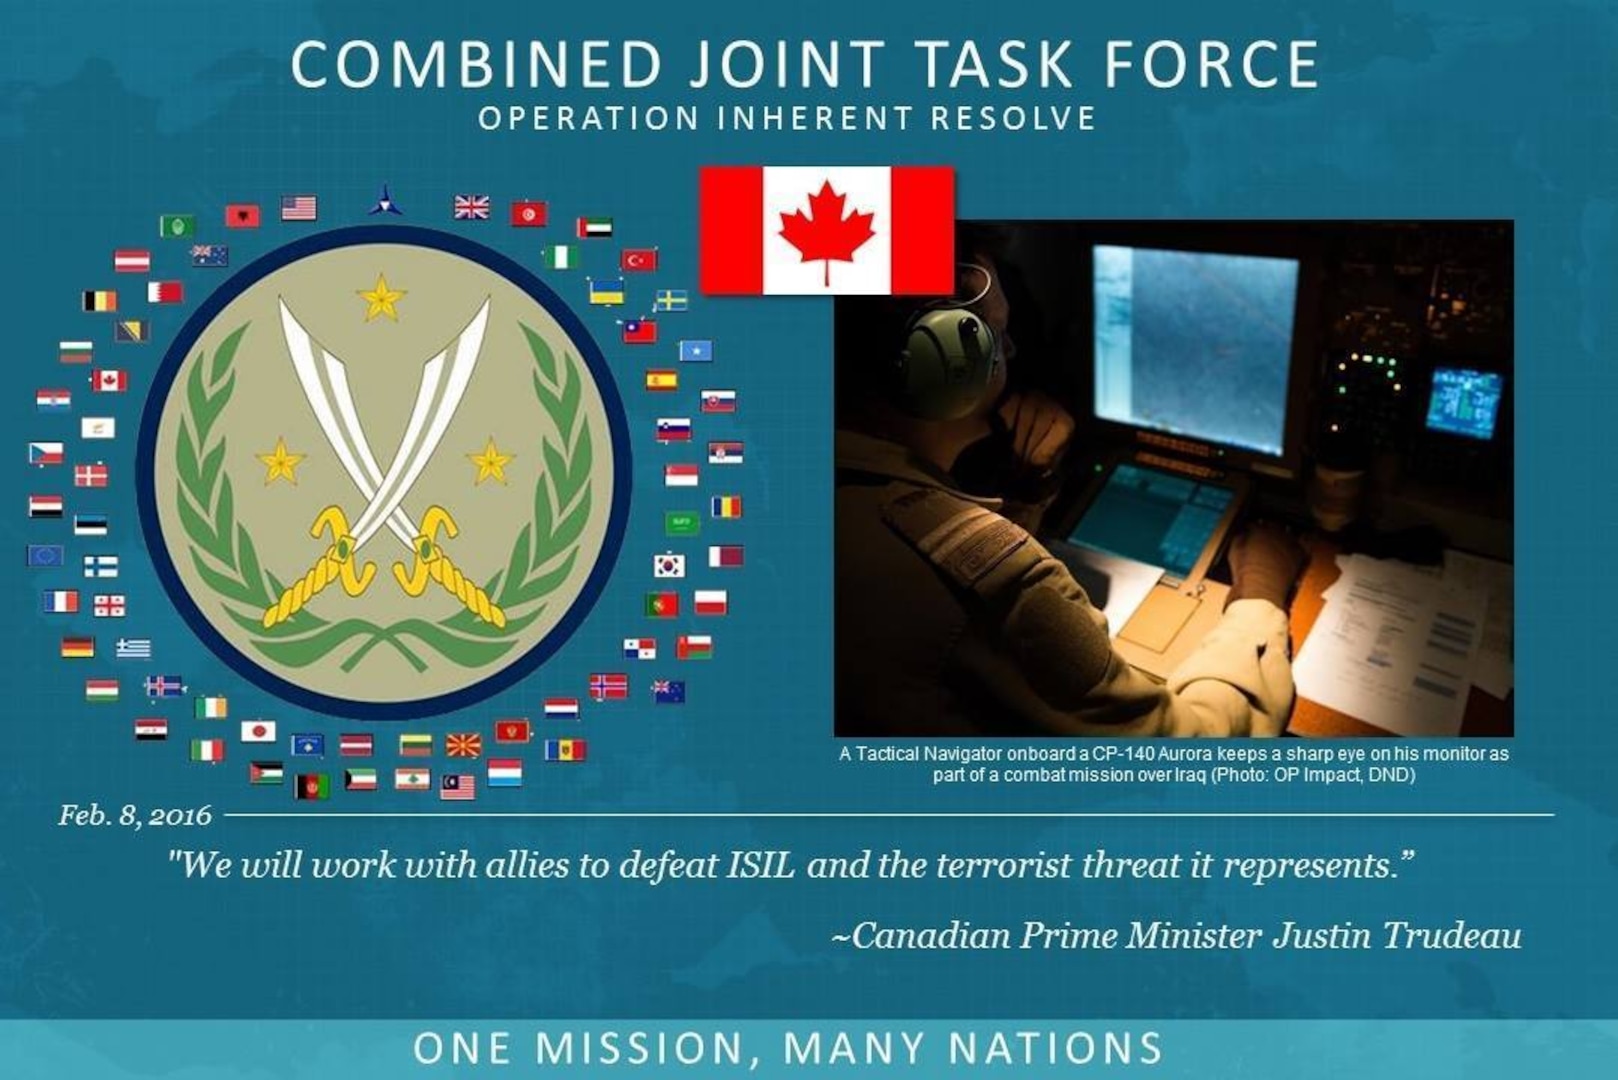 A ‪‎coalition‬ of more than 60 international partners has united to assist and support the Iraqi Security Forces to degrade and defeat ‪#‎Daesh‬. This unity between coalition partners has contributed to Iraq’s significant progress in halting Daesh's momentum and in some places reversing it.